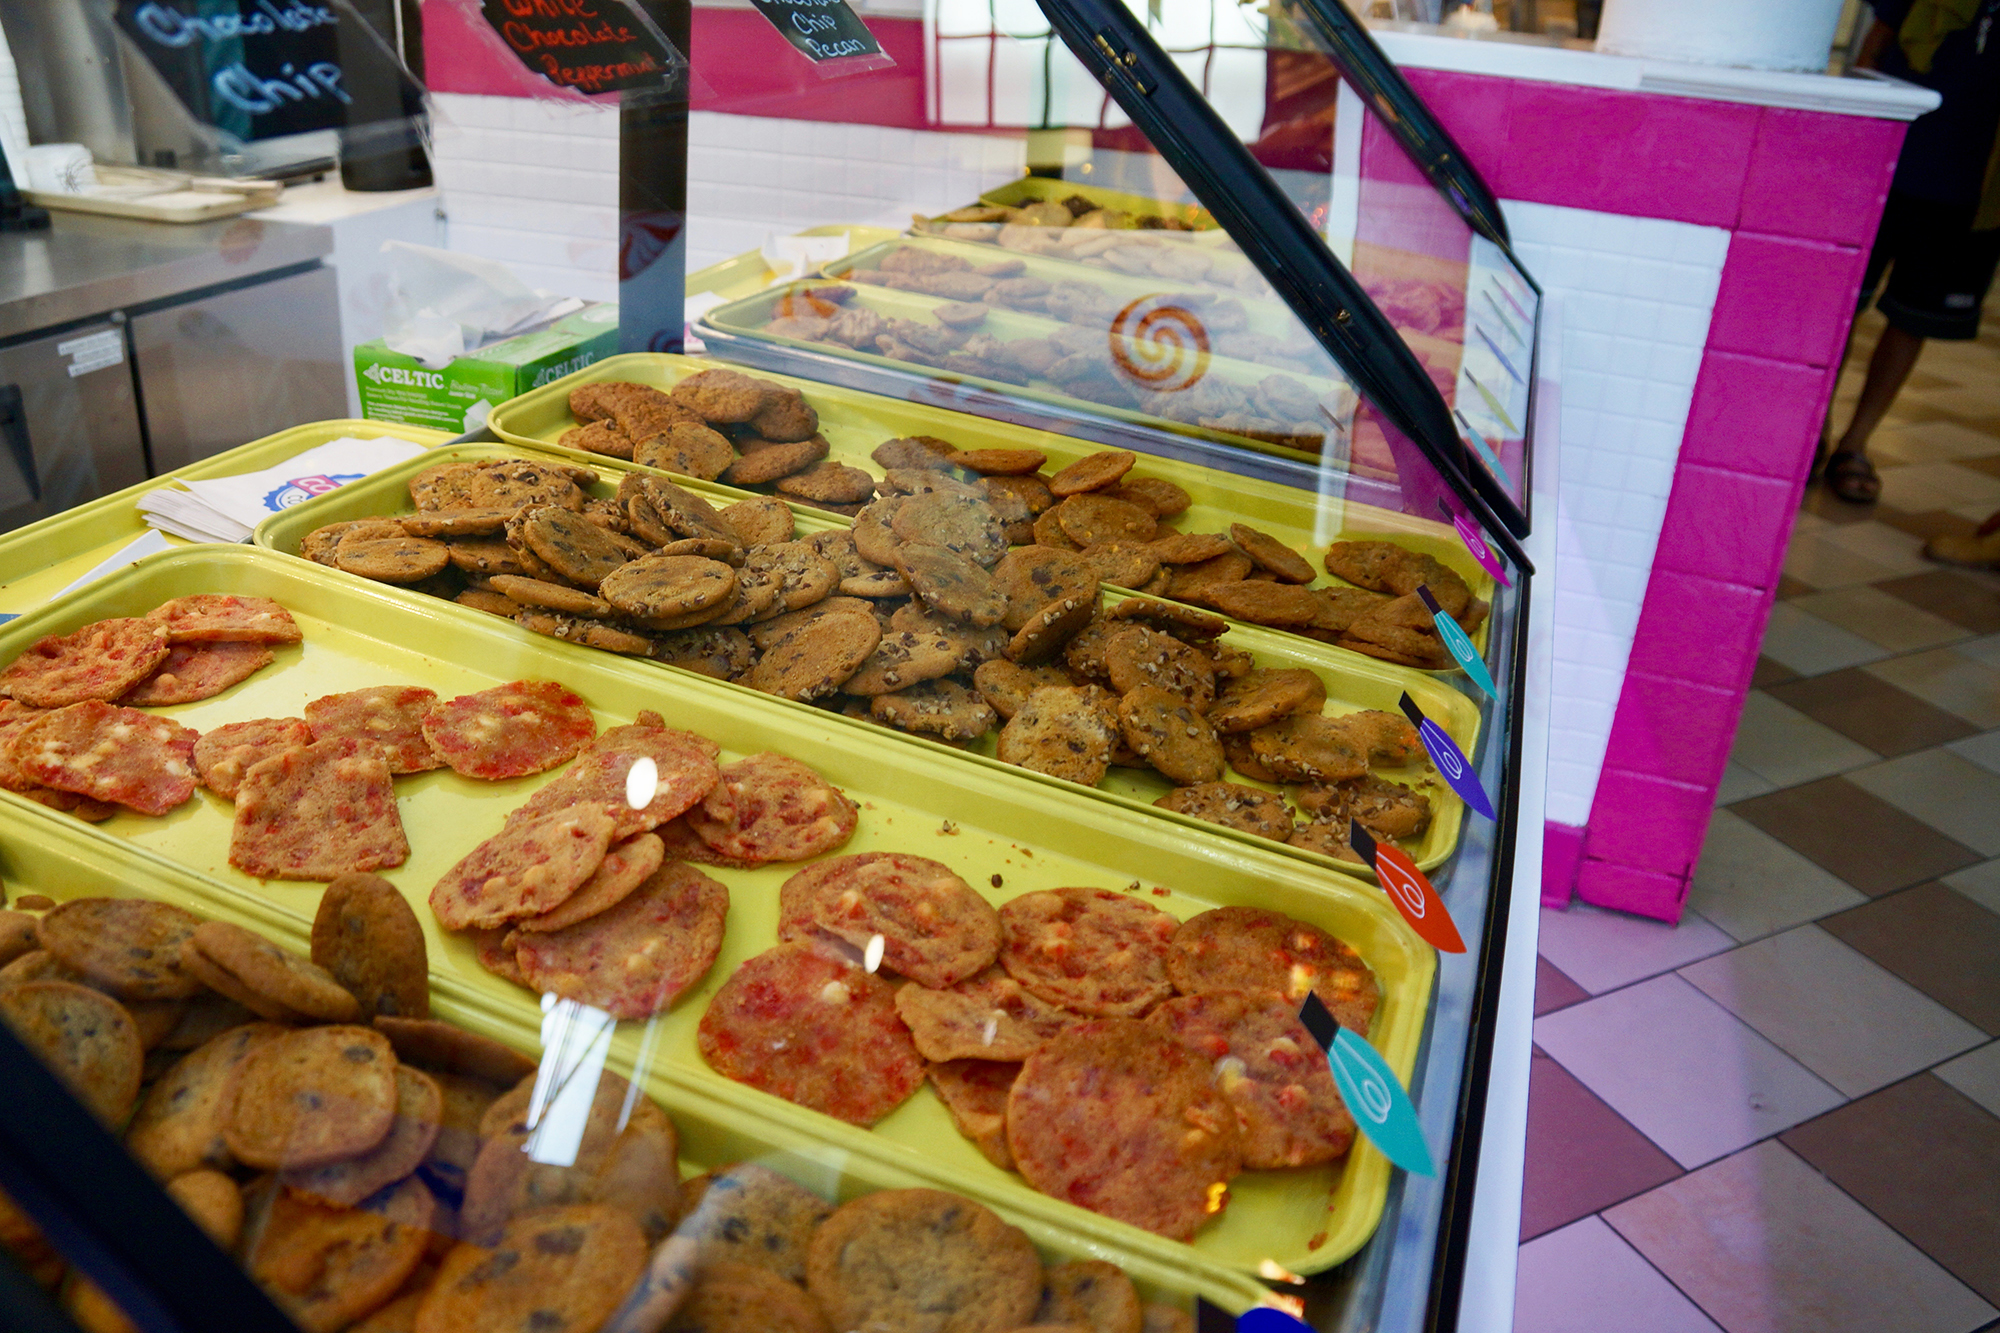 Cookies on display at First Coast Cookies at Regency Square Mall.